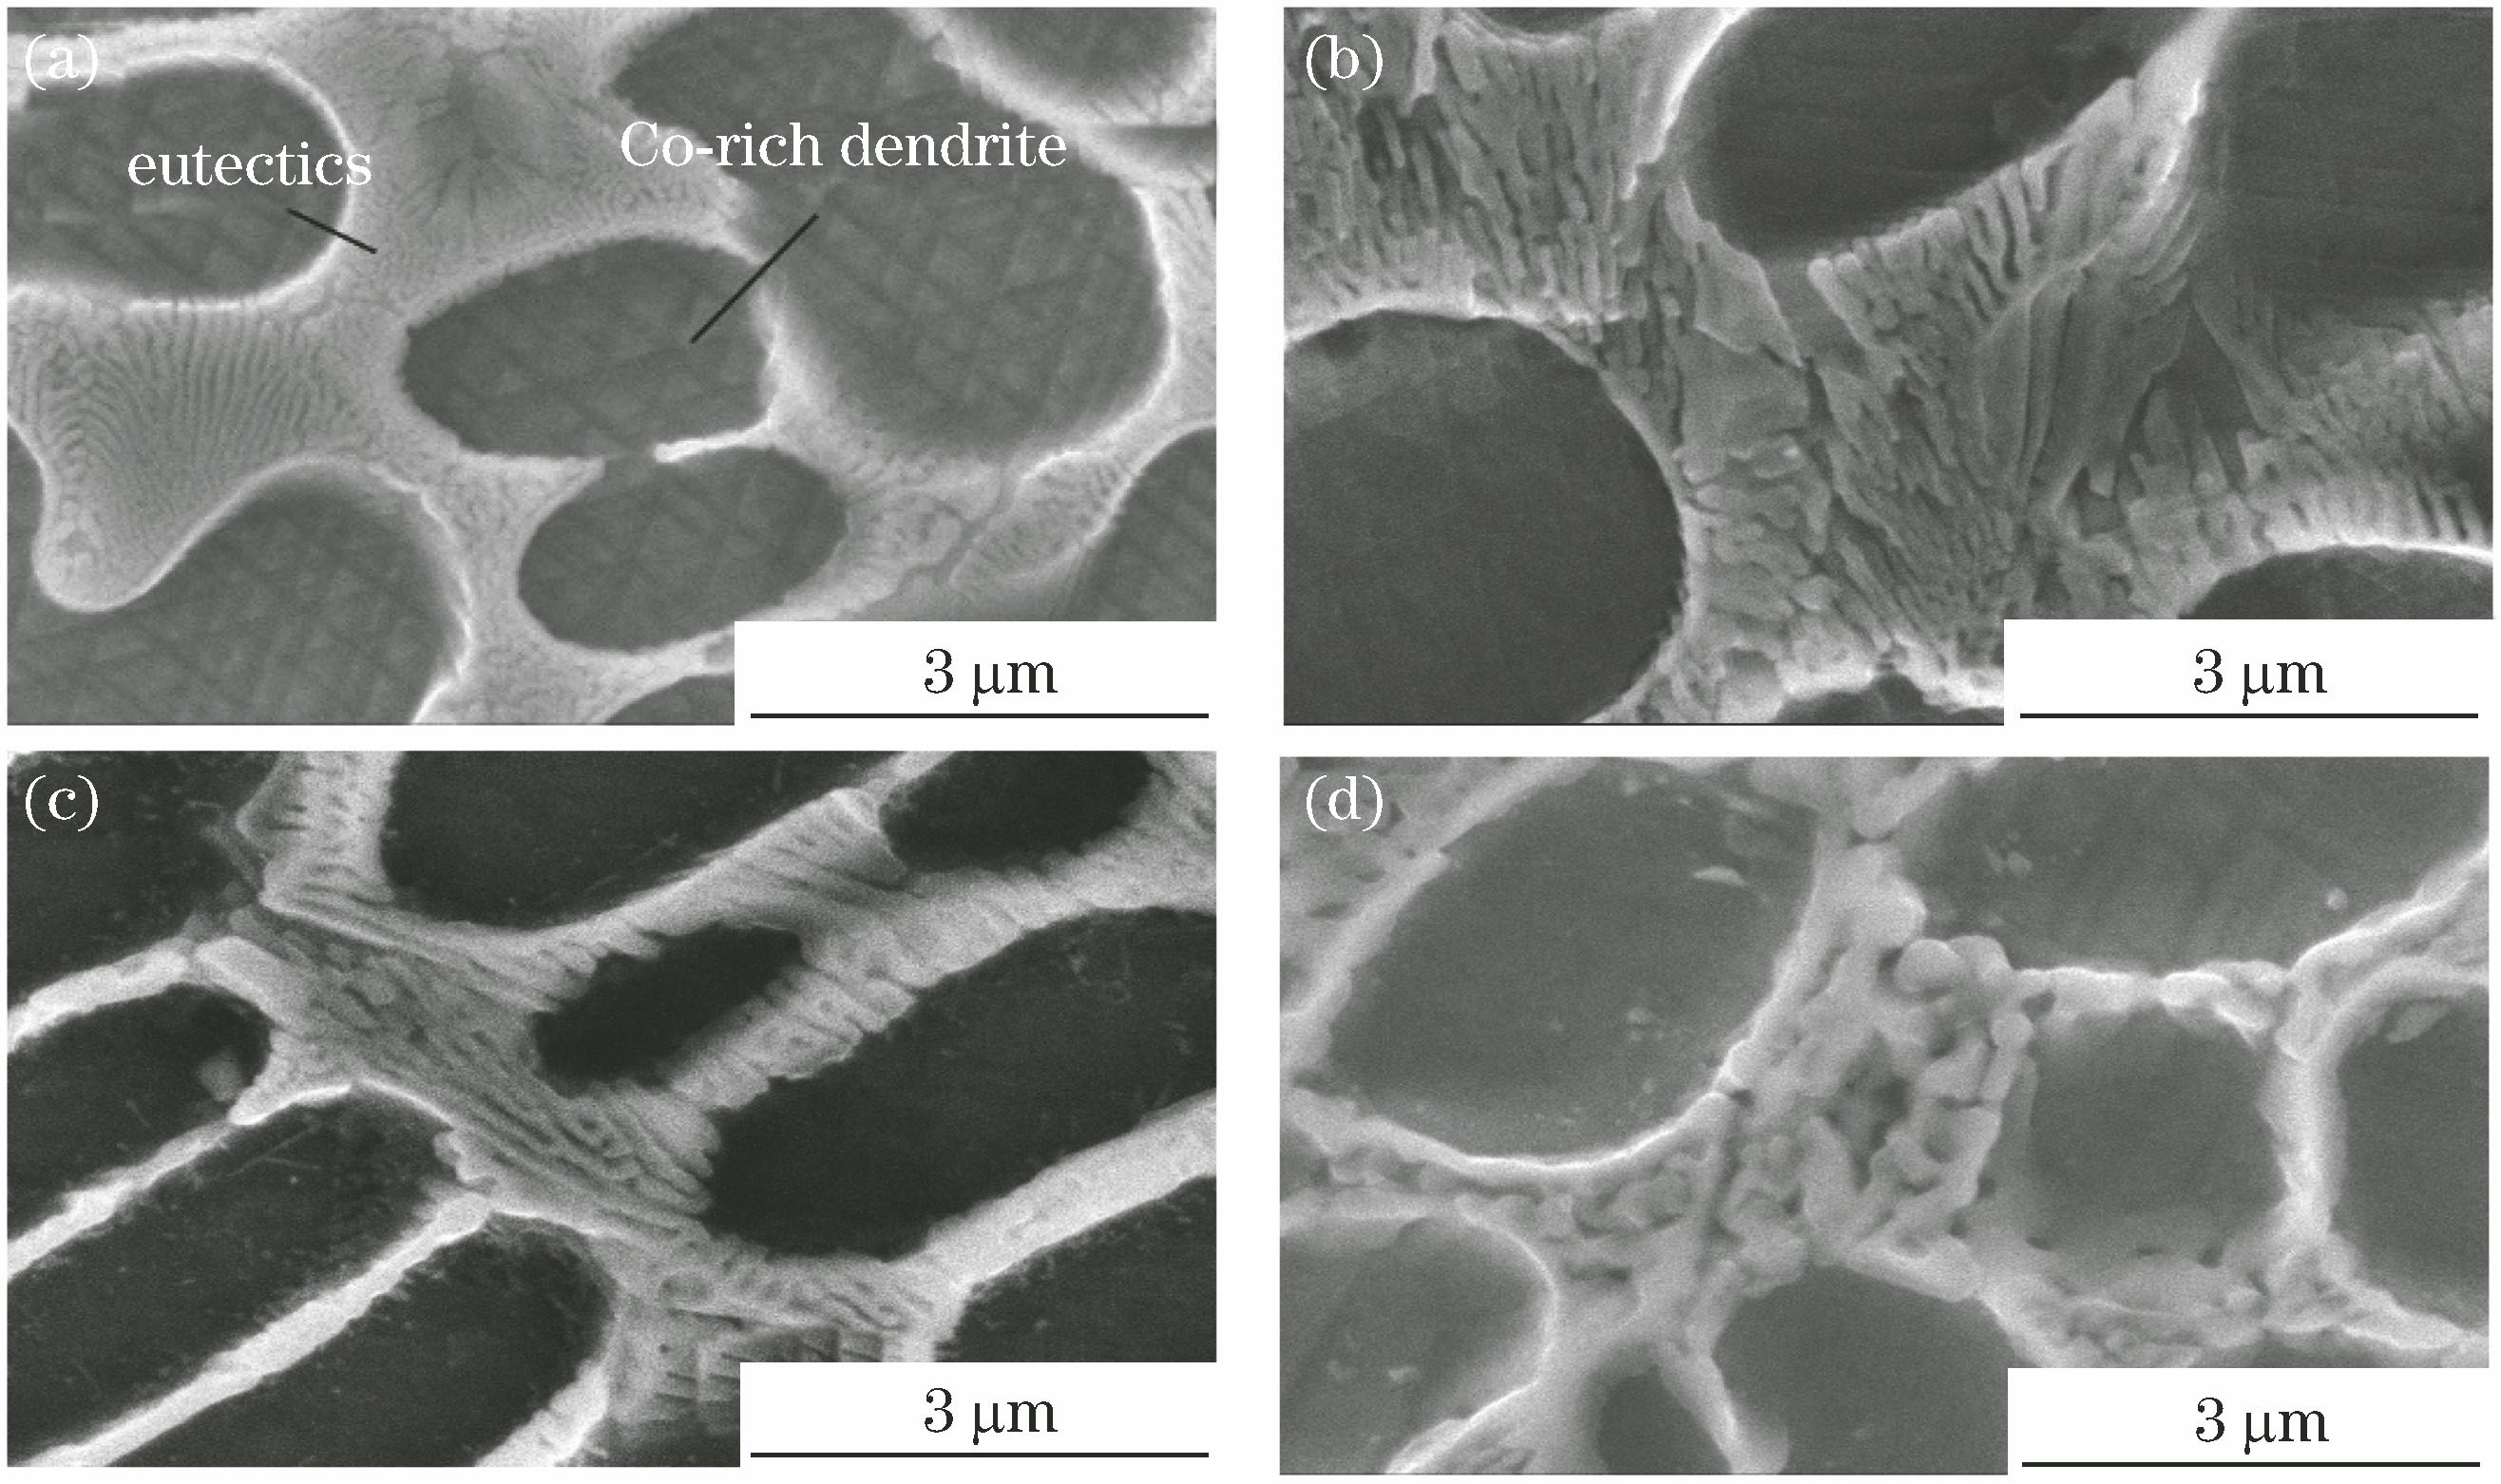 Microstructures of Stellite 6 coating after heat treating at different temperatures. (a) RT; (b) 700 ℃; (c) 800 ℃; (d) 900 ℃